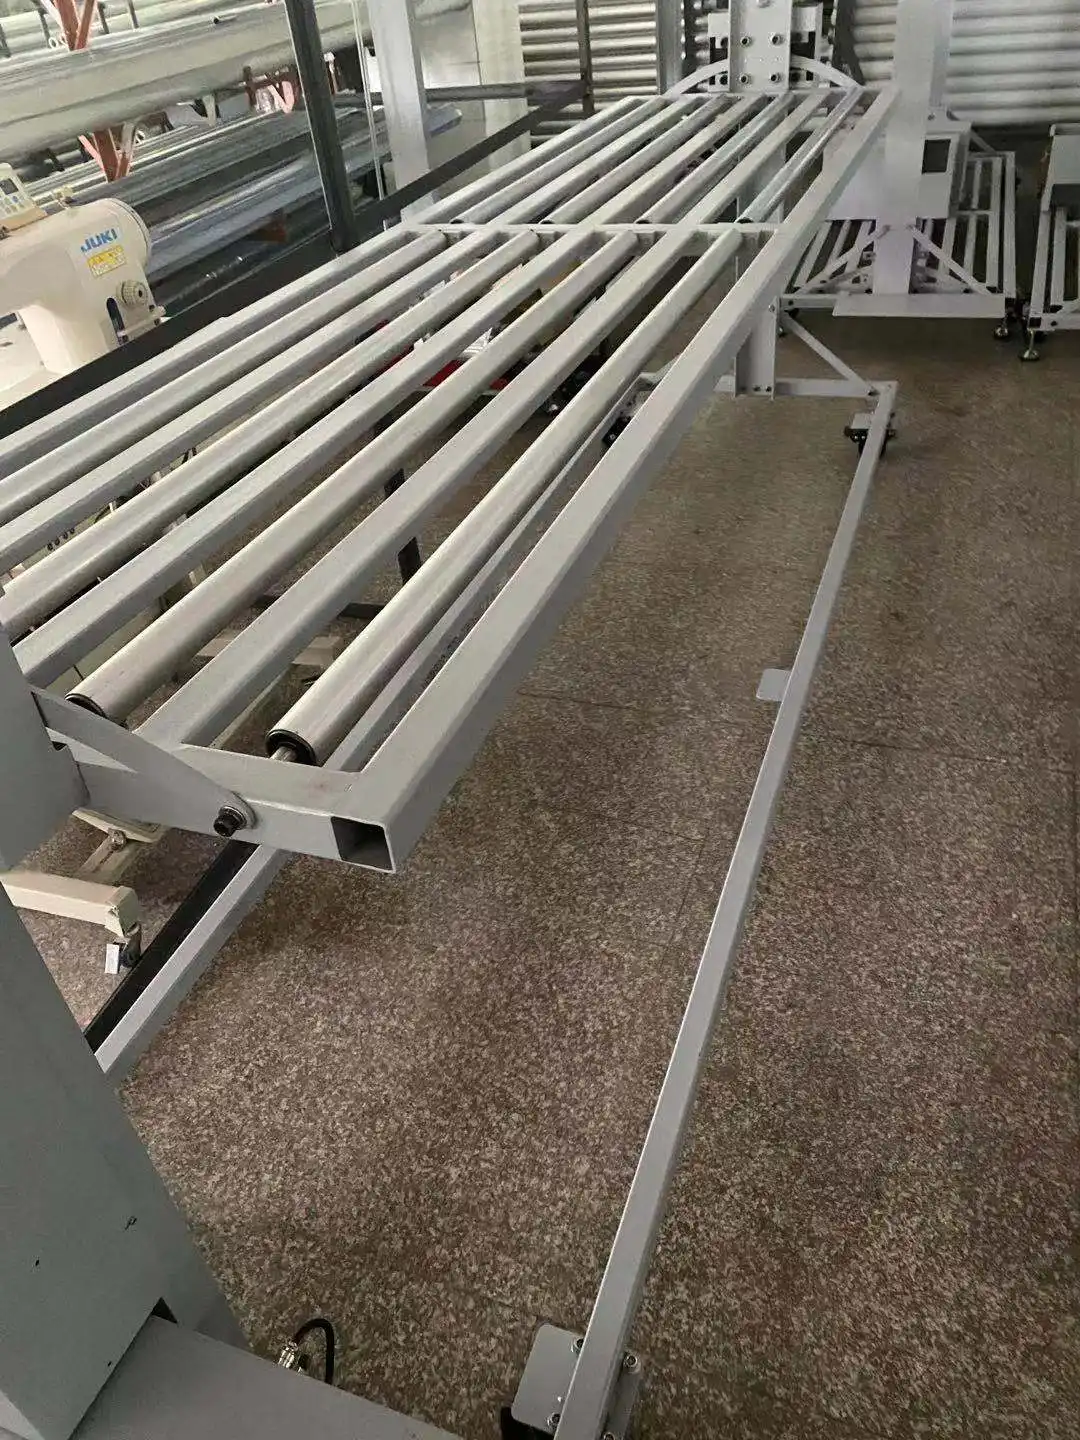 High Efficiency Automatic Fabric Roll Lifter